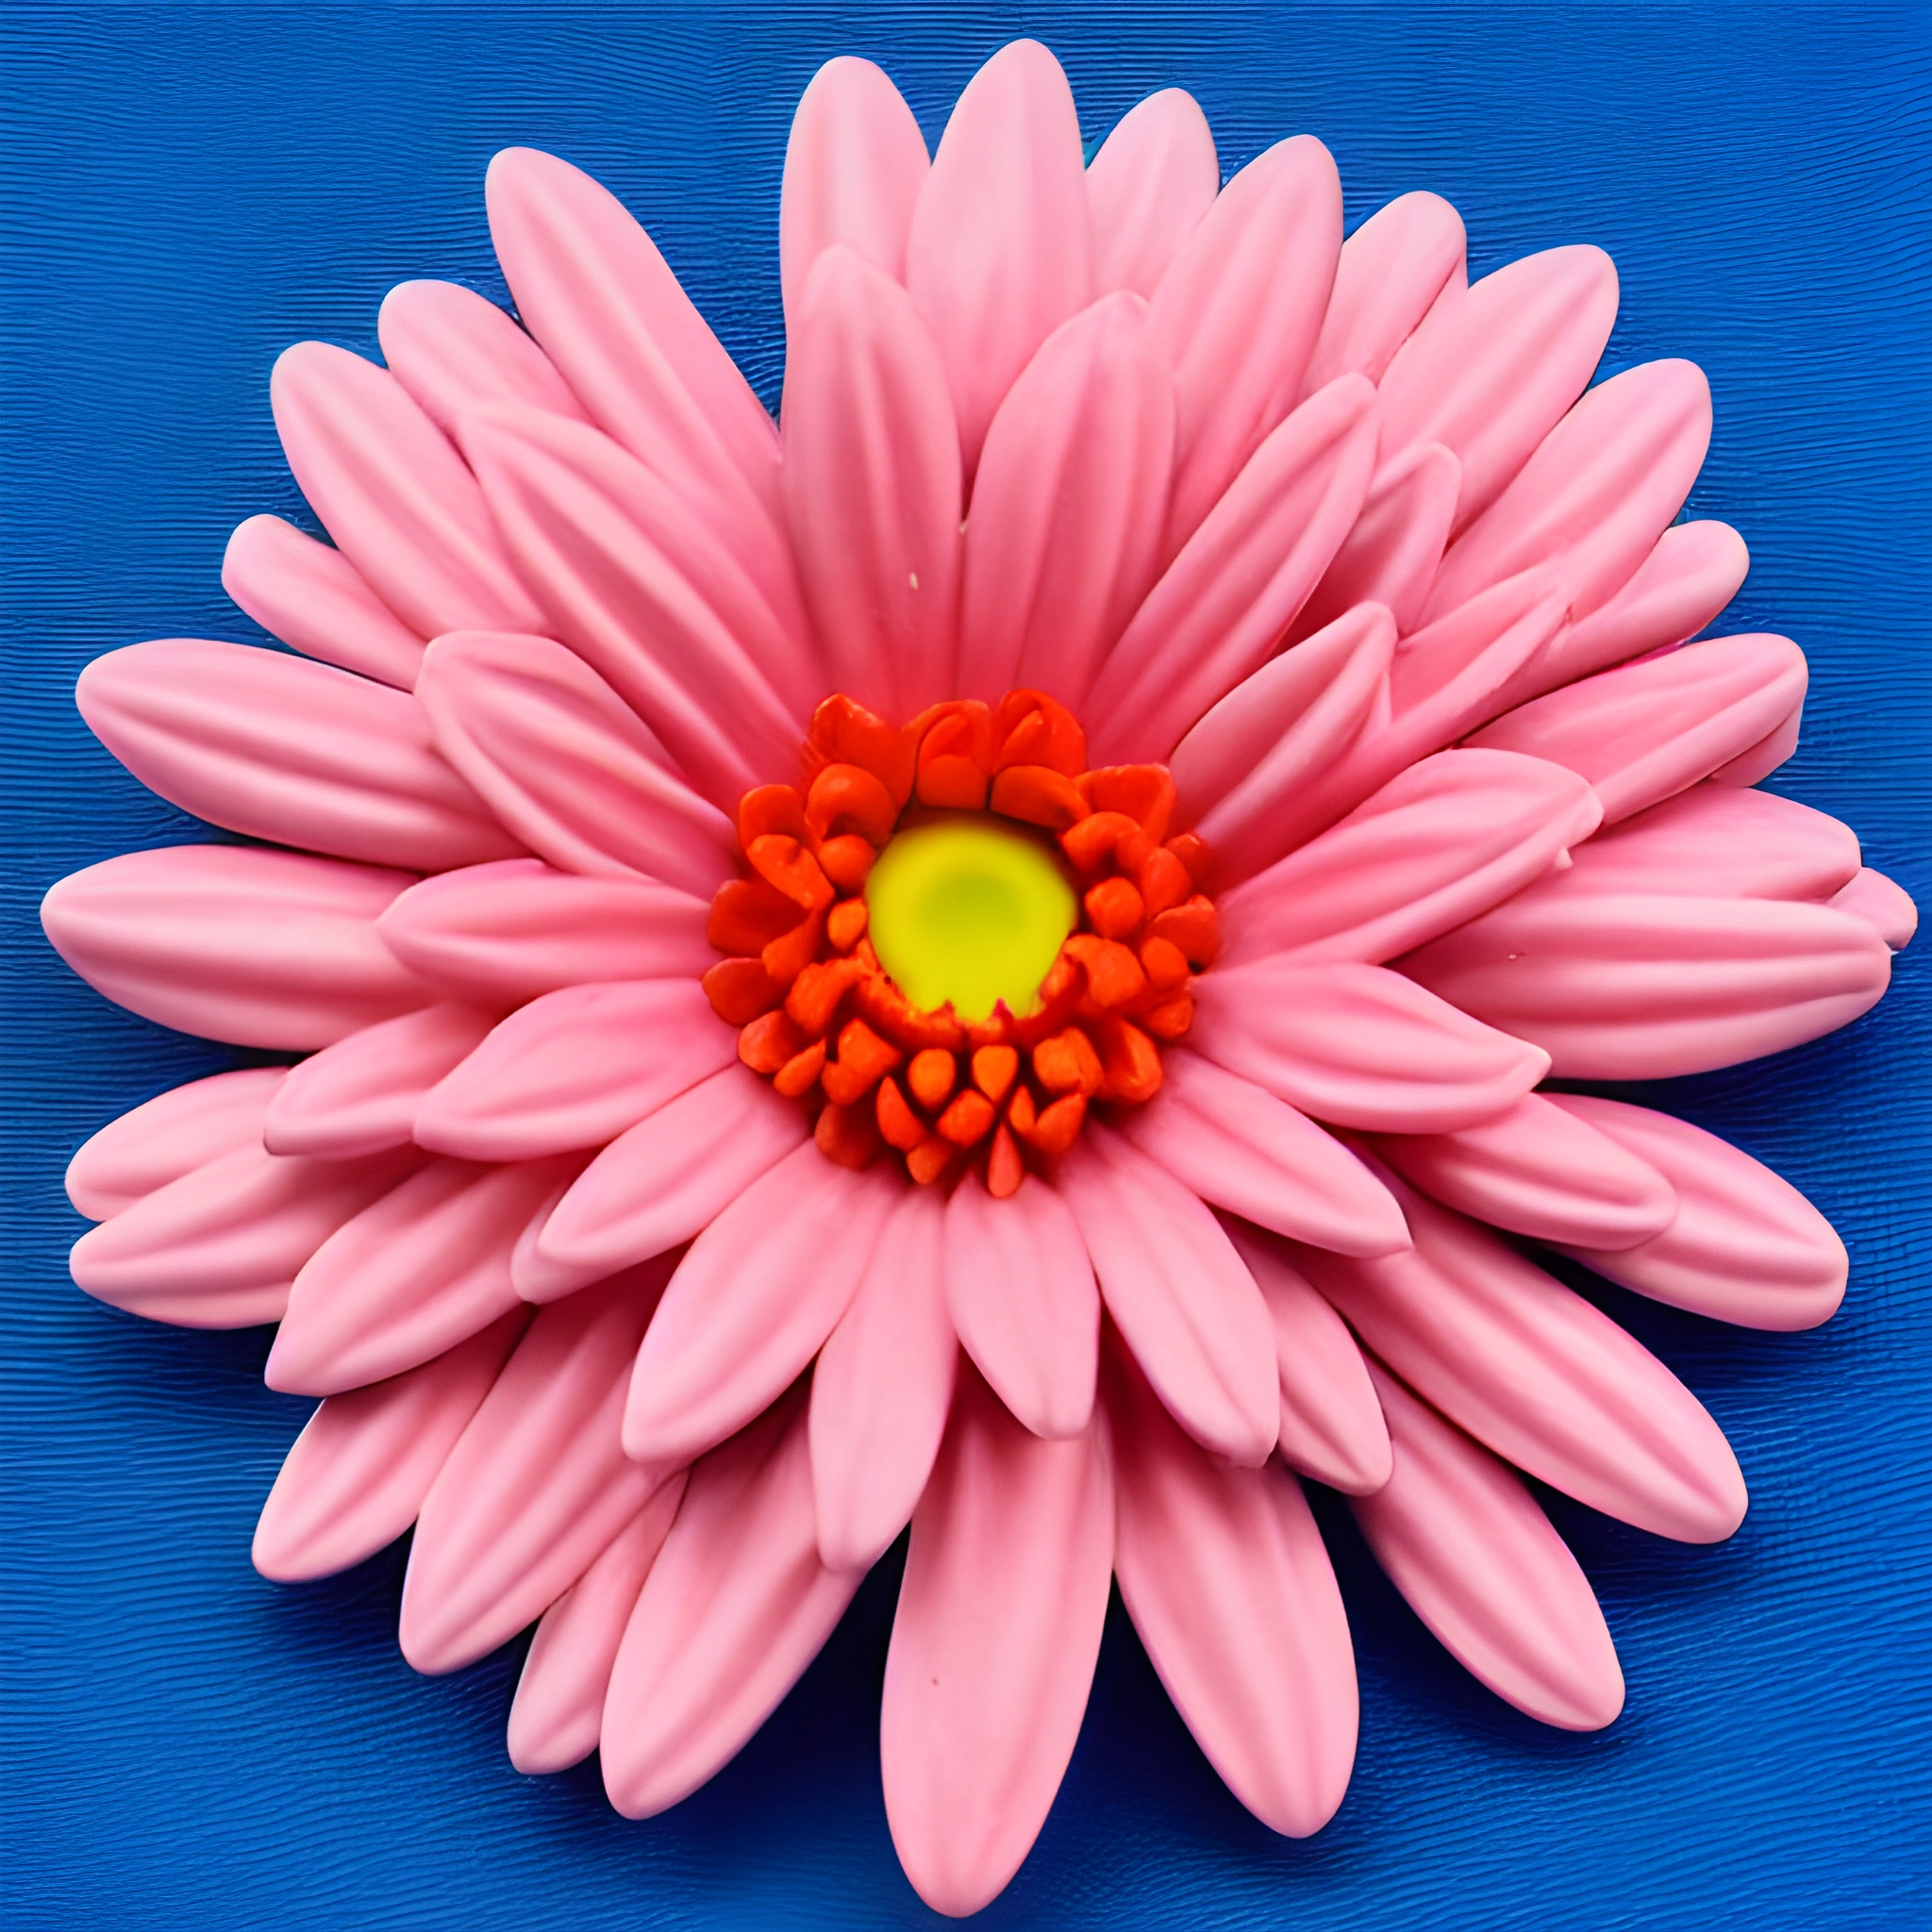 a pink flower with a yellow center on a blue surface